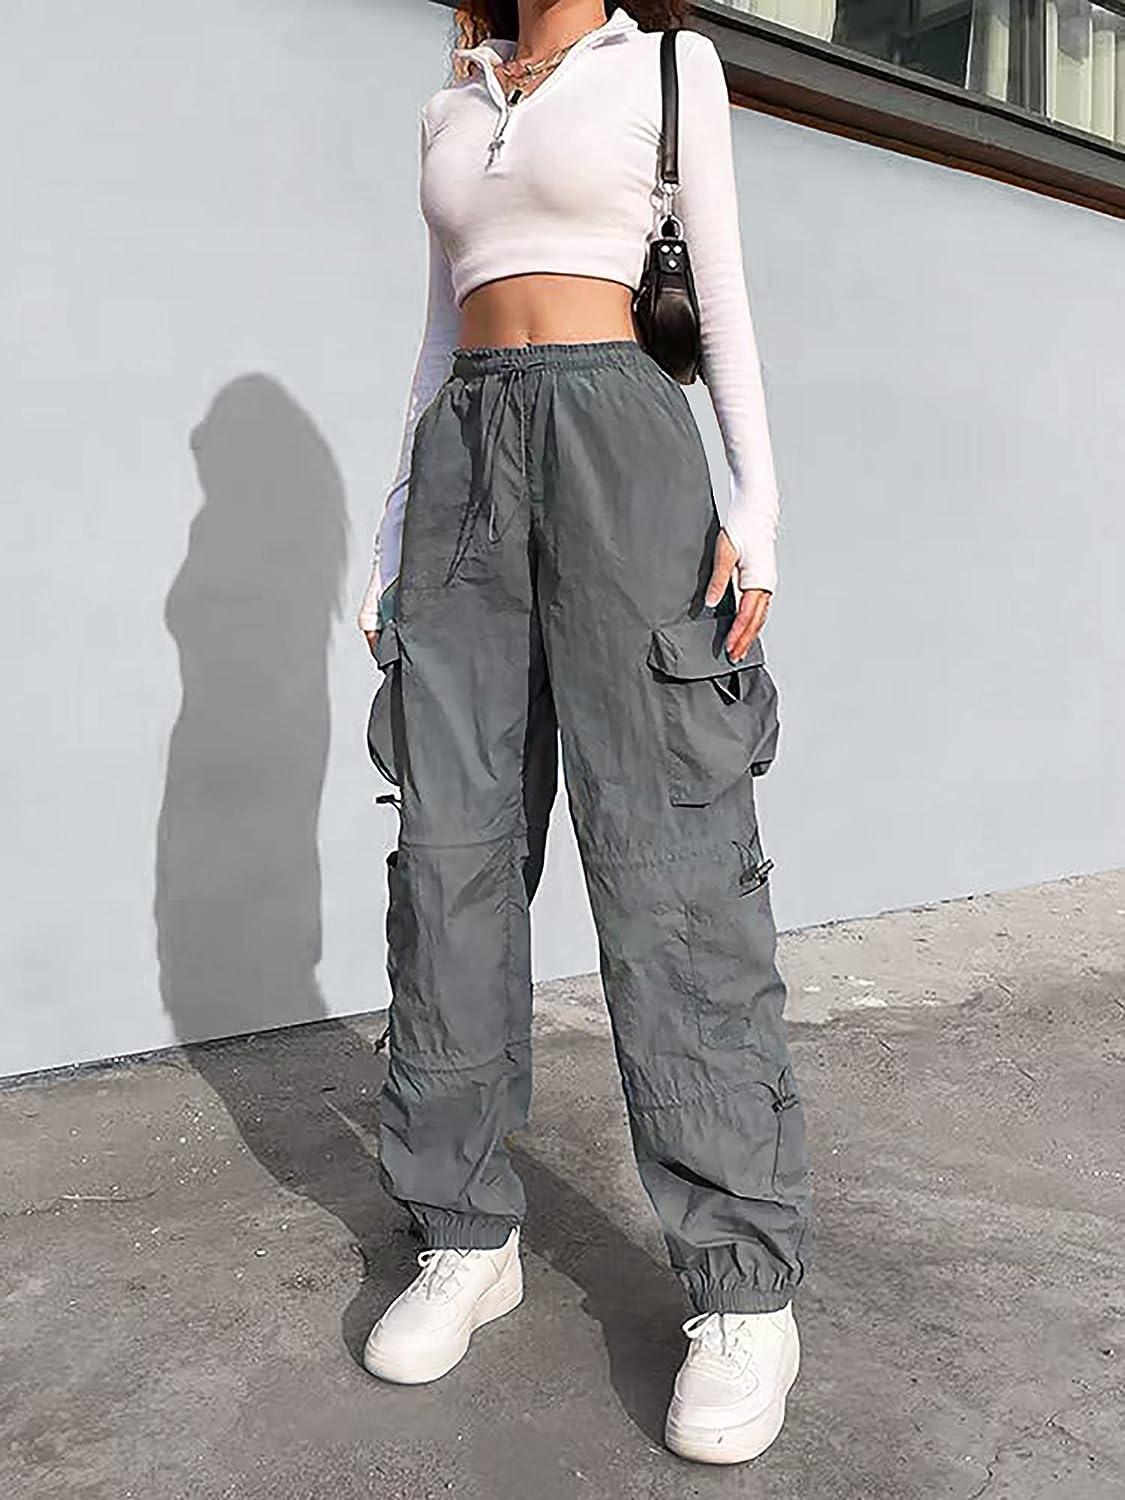 Punk Ruched Baggy Cargo Pants  Pants for women, Cargo pants women, Women  pants casual